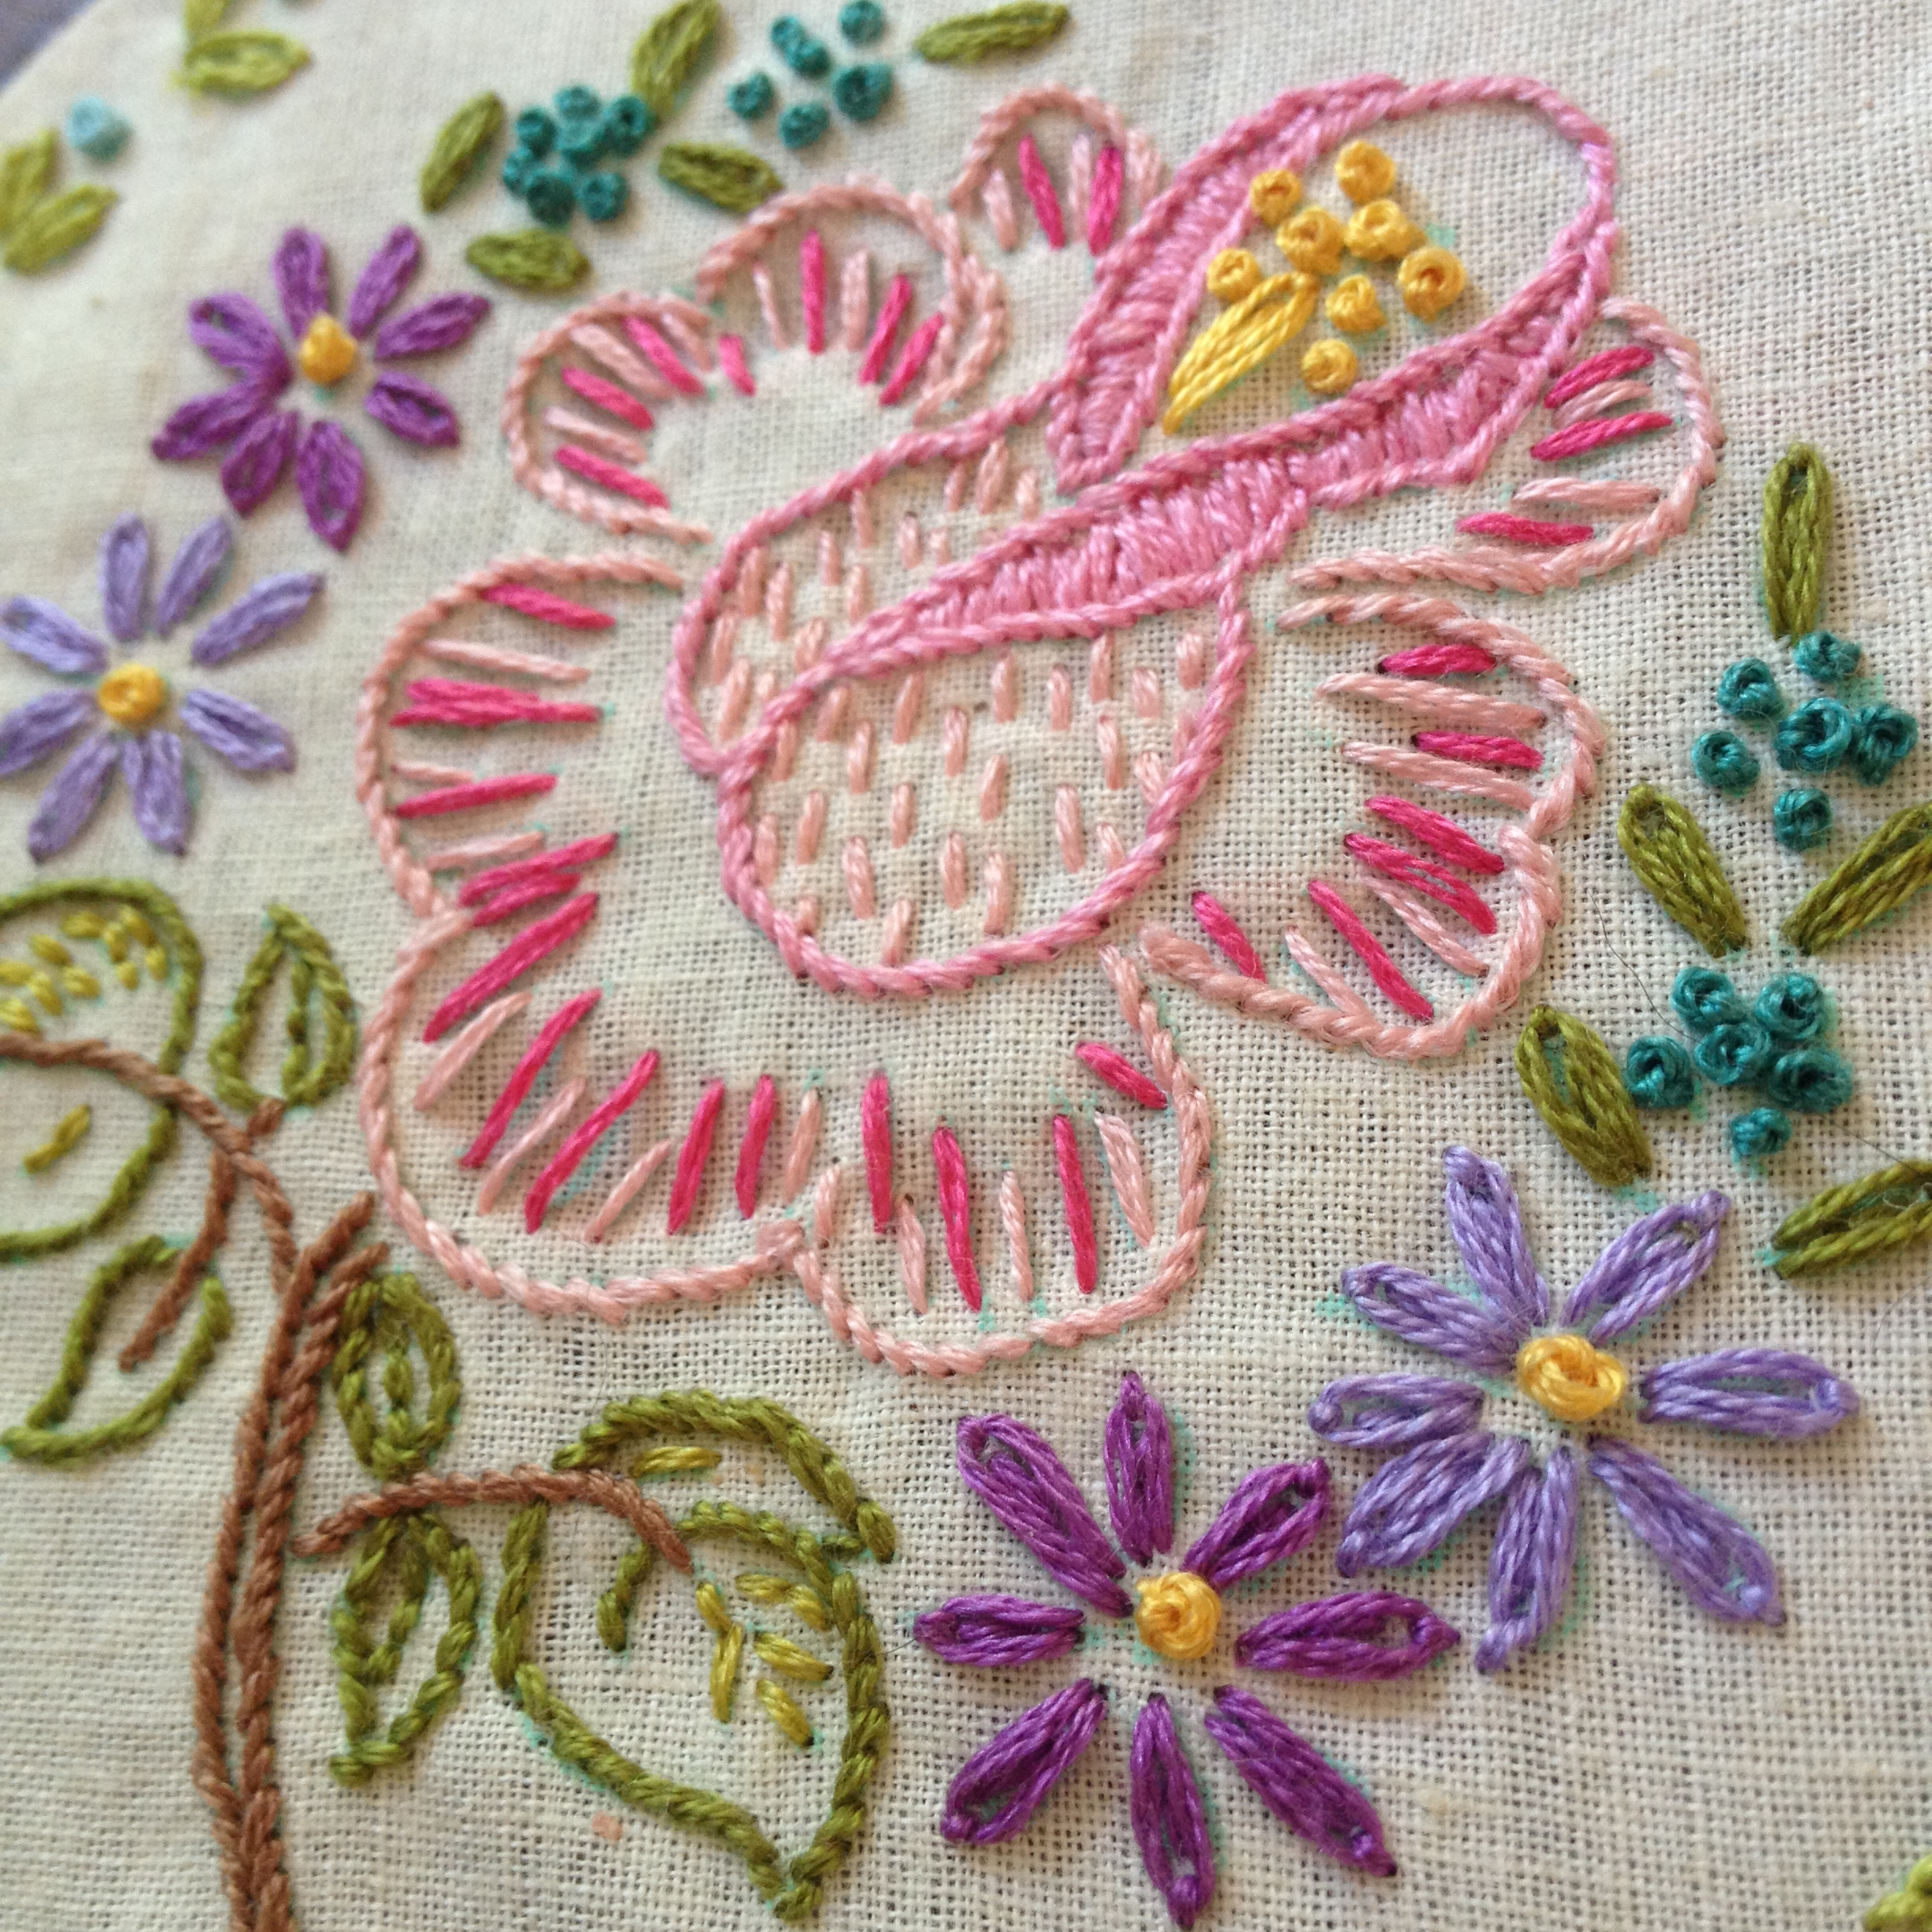 Retro Embroidery Patterns Vintage Hand Embroidery Patterns My Original Inspiration In The